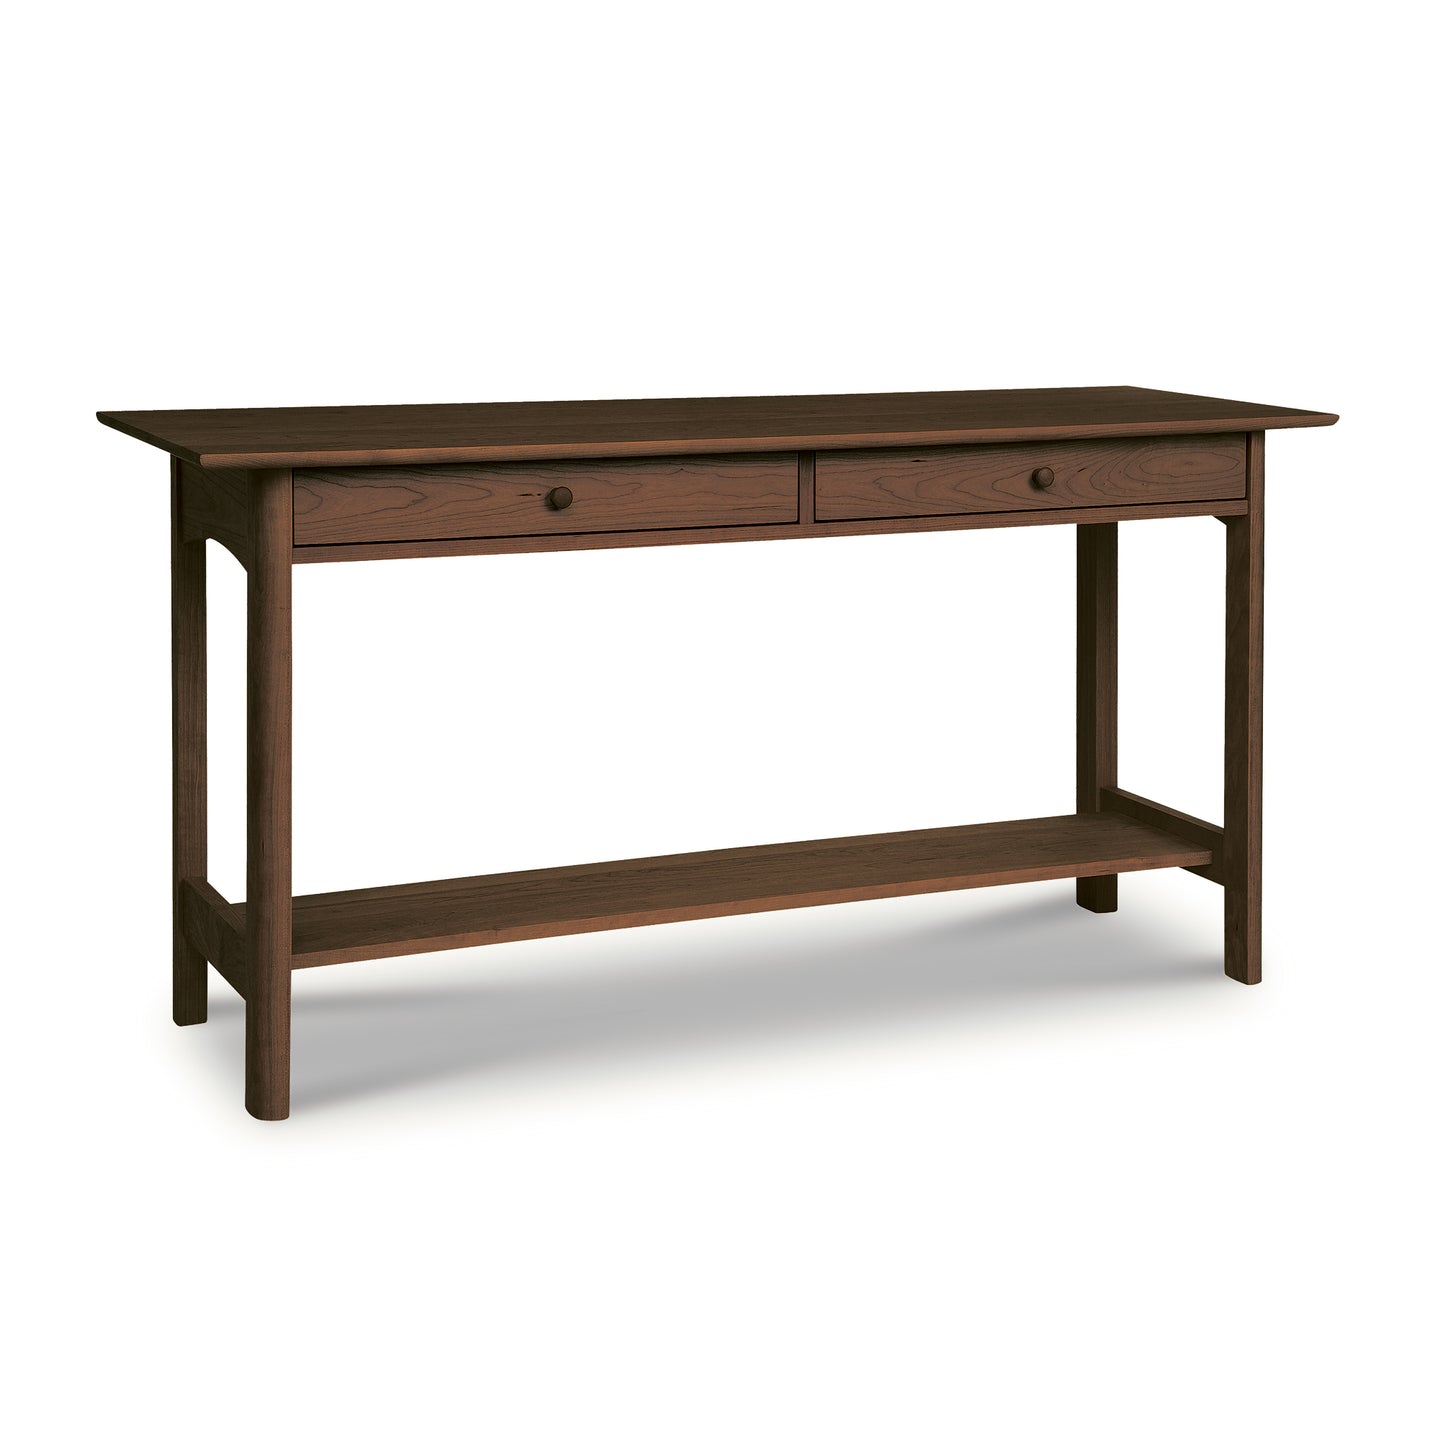 A solid wood Vermont Furniture Designs Heartwood Shaker 2-Drawer Console Table on a white background, featuring an eco-friendly oil finish.